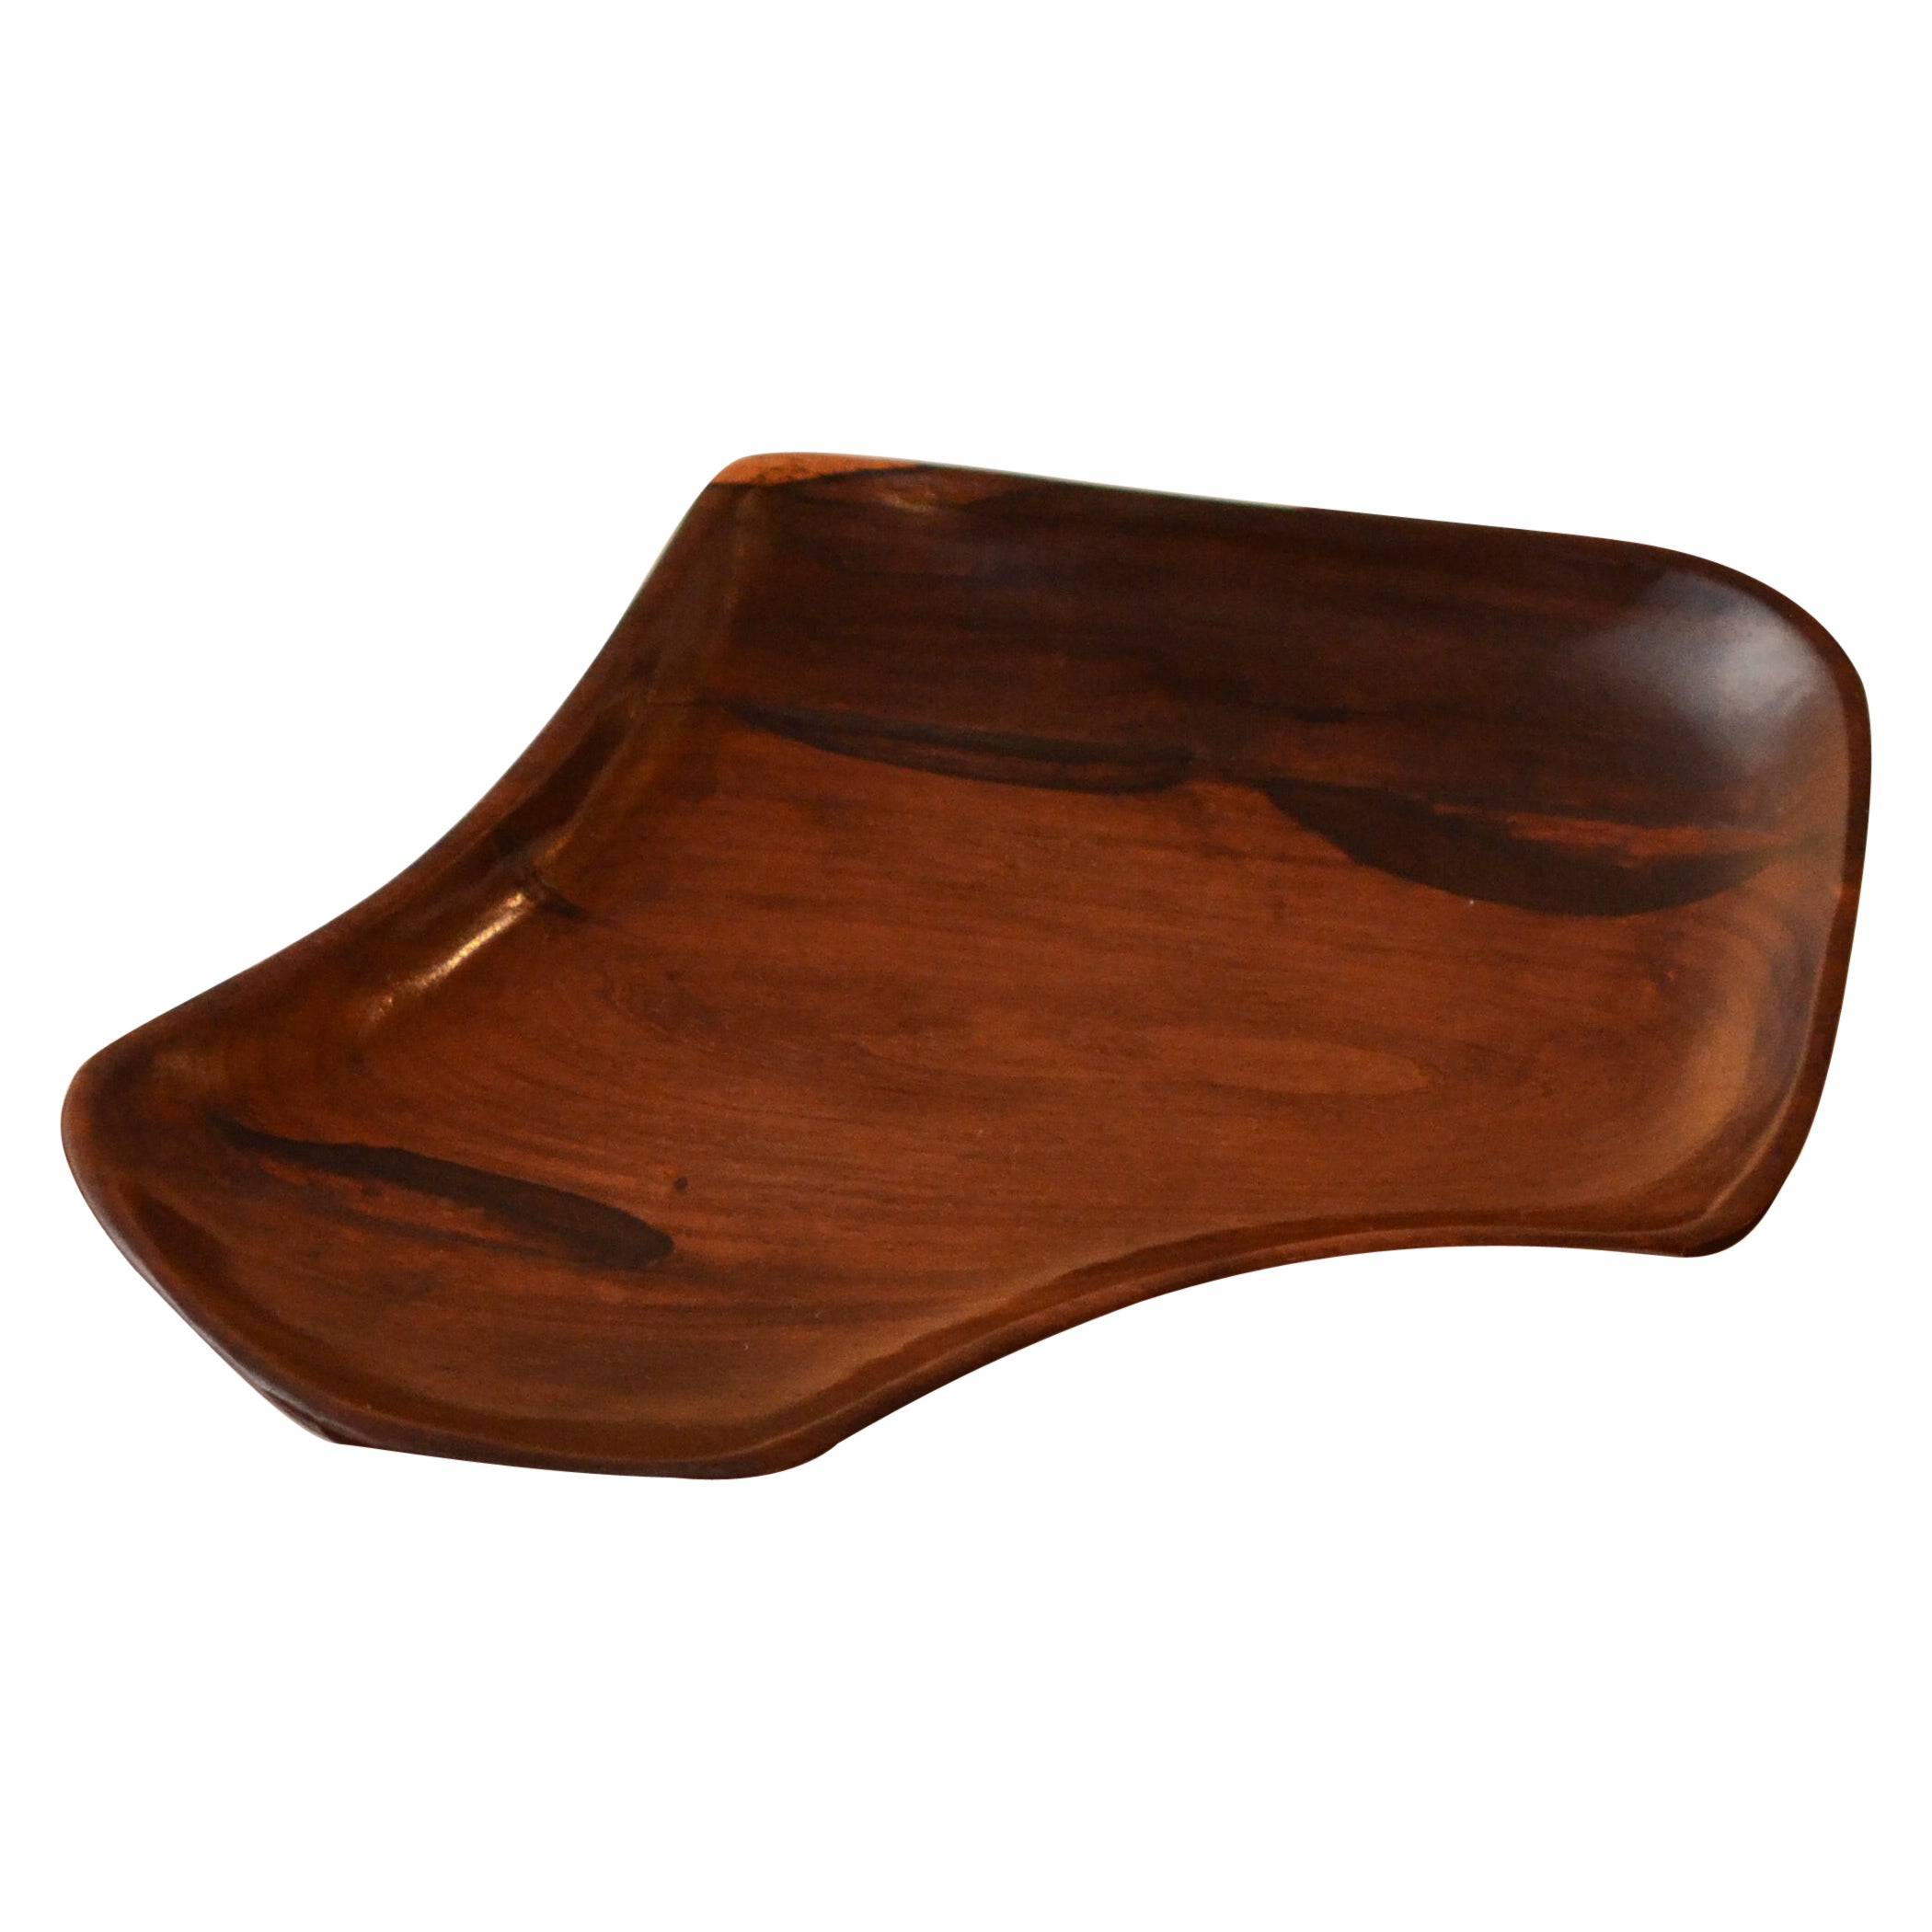 Brazilian Midcentury Organic Bowl in Rosewood, c. 1970 For Sale